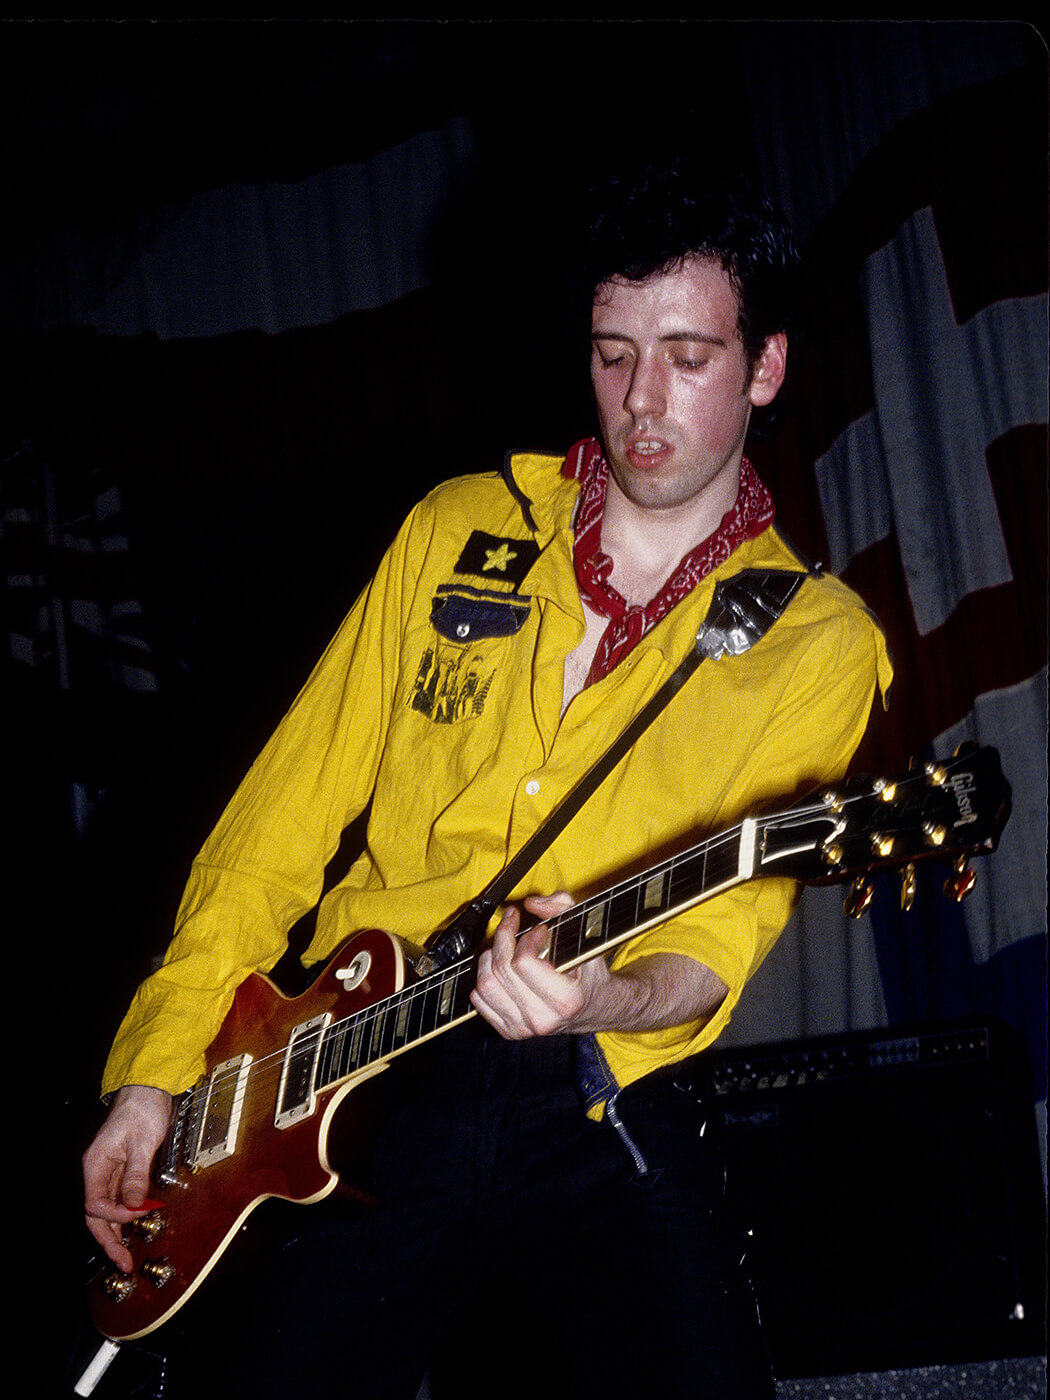 Mick Jones of The Clash performing with a Gibson Les Paul in 1979, photo by Larry Hulst/Michael Ochs Archives via Getty Images